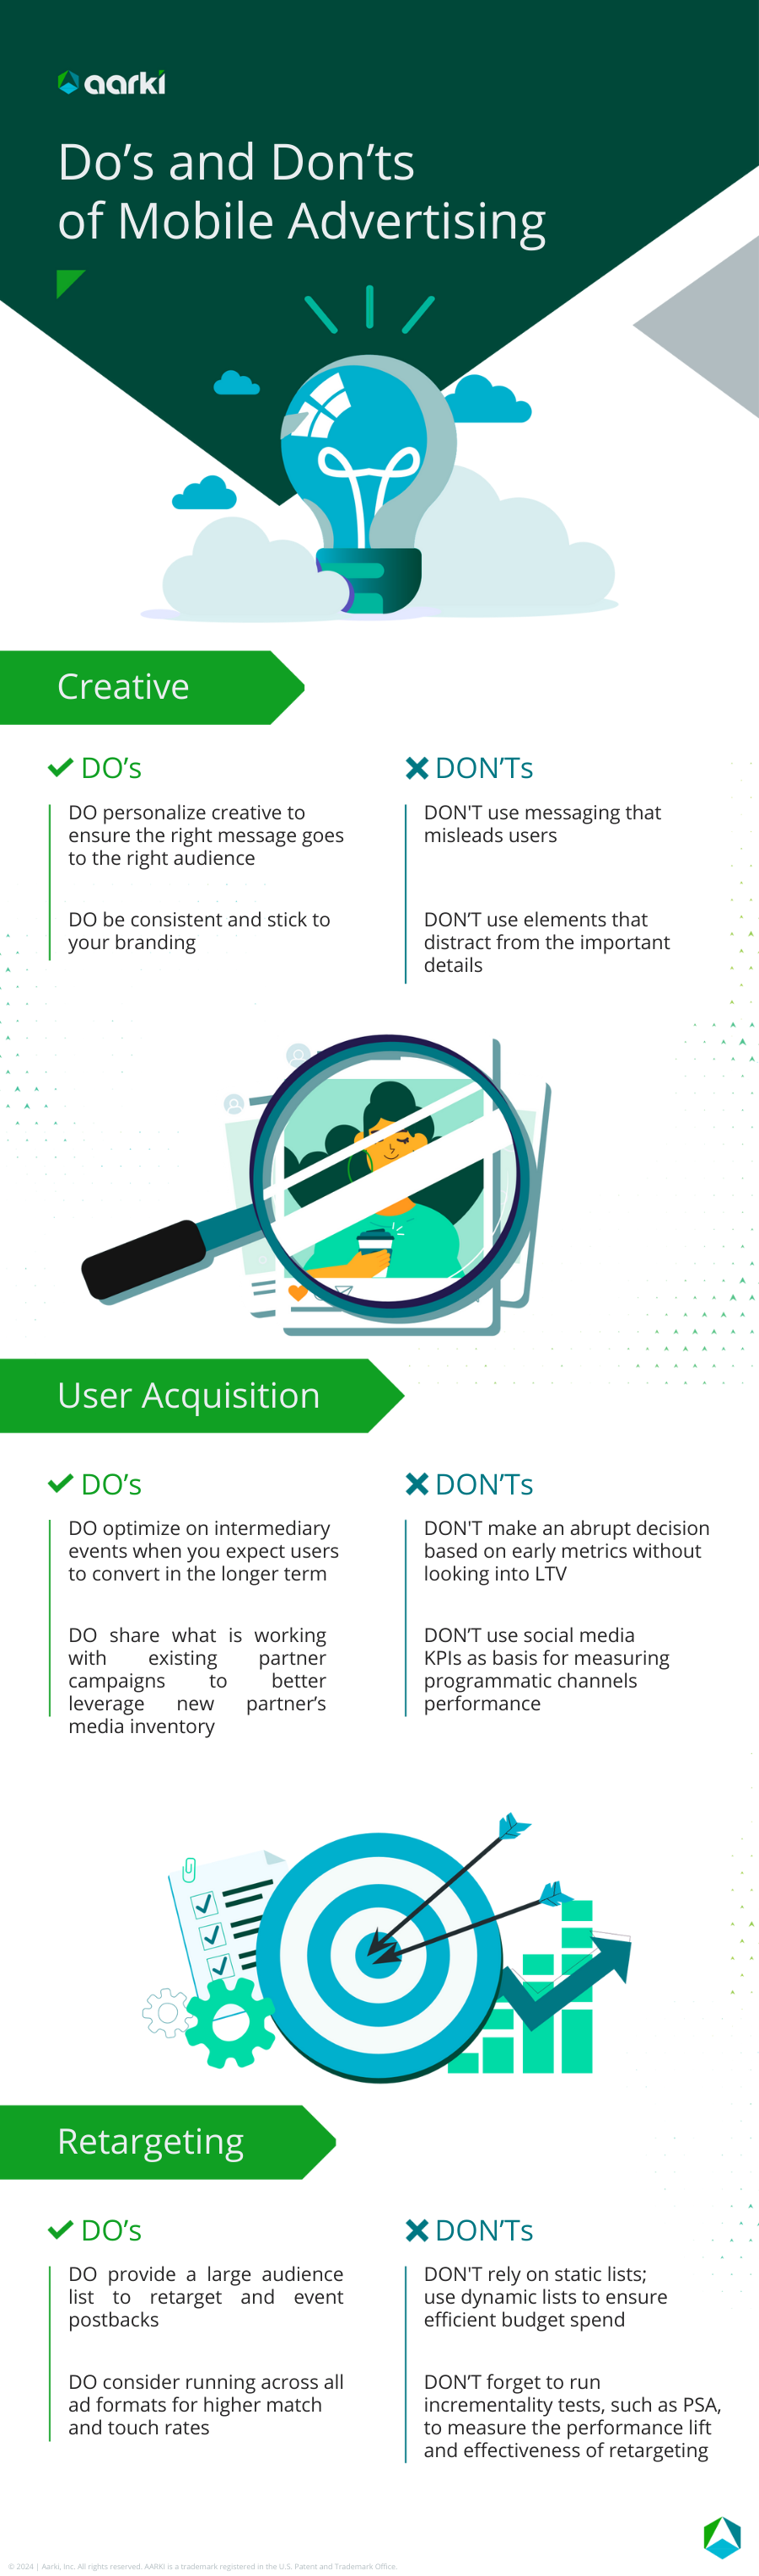 Infographic - Dos and Donts Mobile Advertising